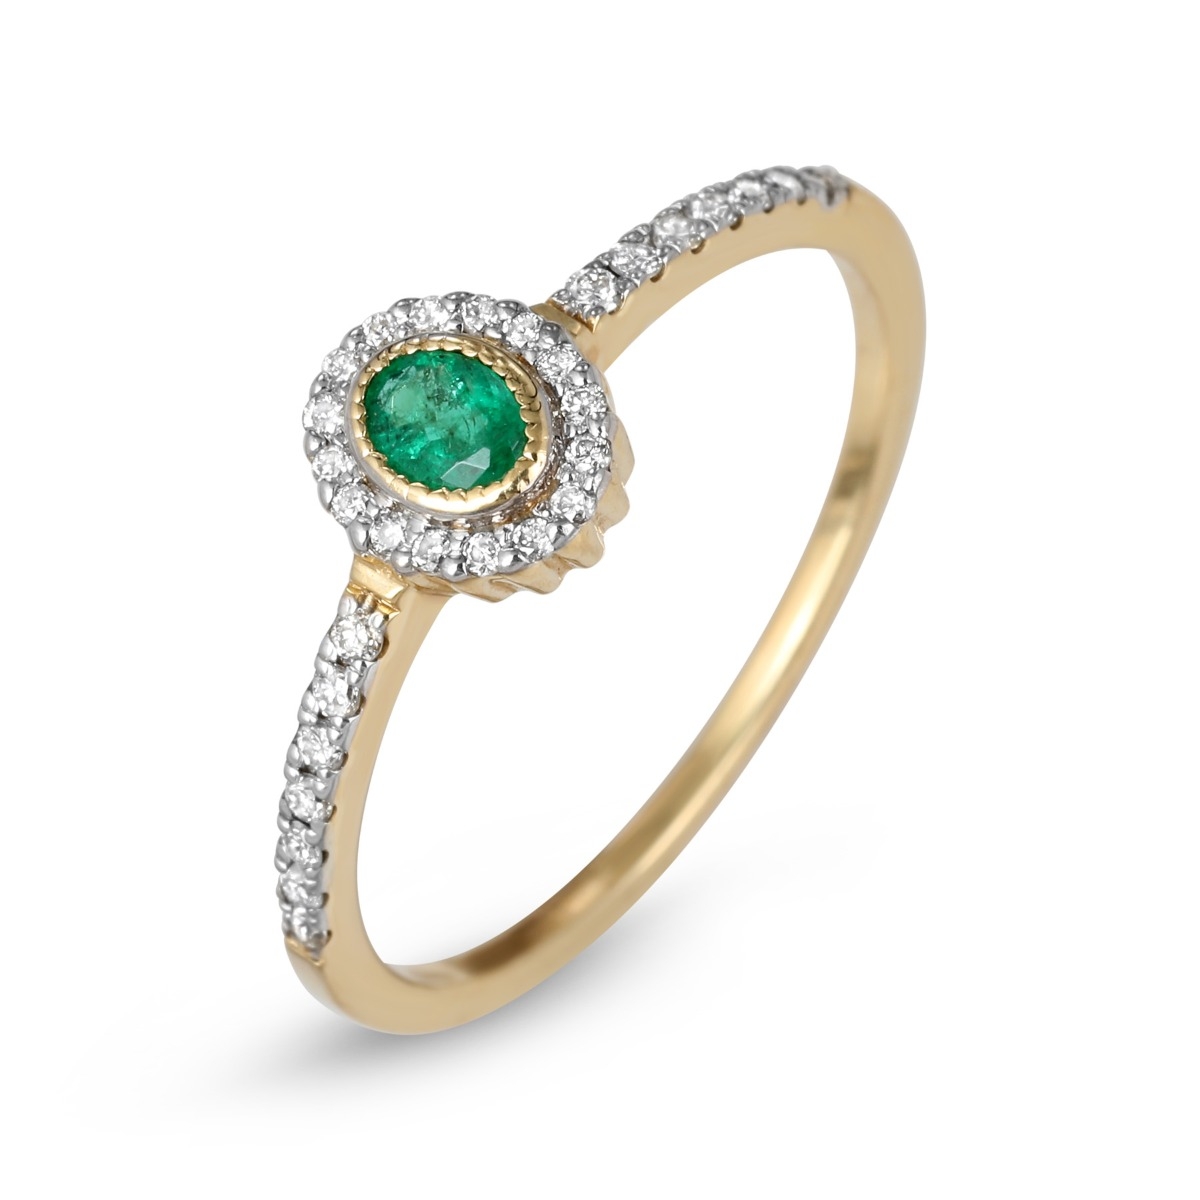 Anbinder 14K Yellow Gold Oval Emerald and Diamond Halo Engagement Ring with Diamond-Set Band - 1